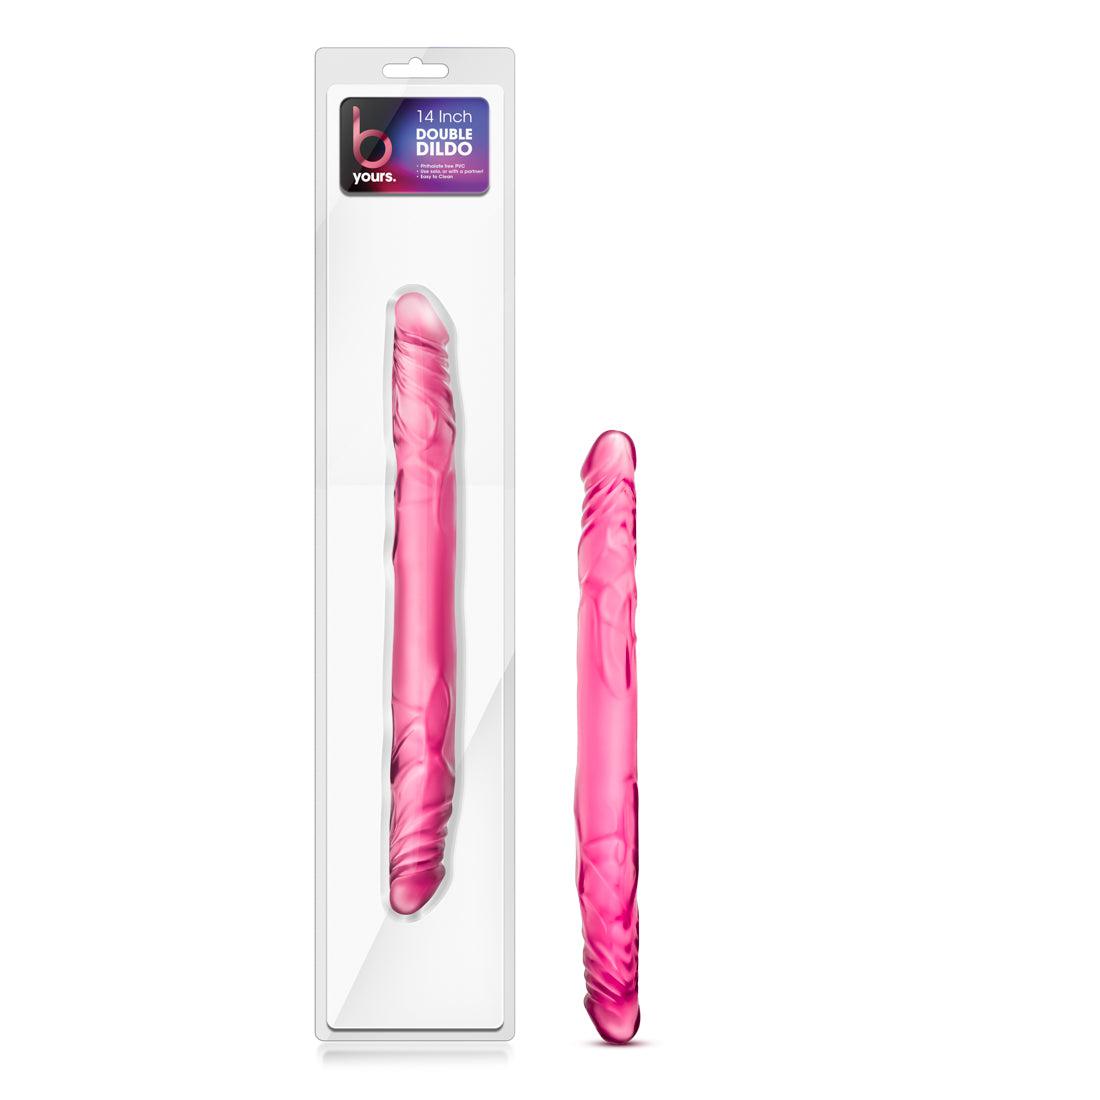 B Yours 14 Inch Double Dildo - Pink